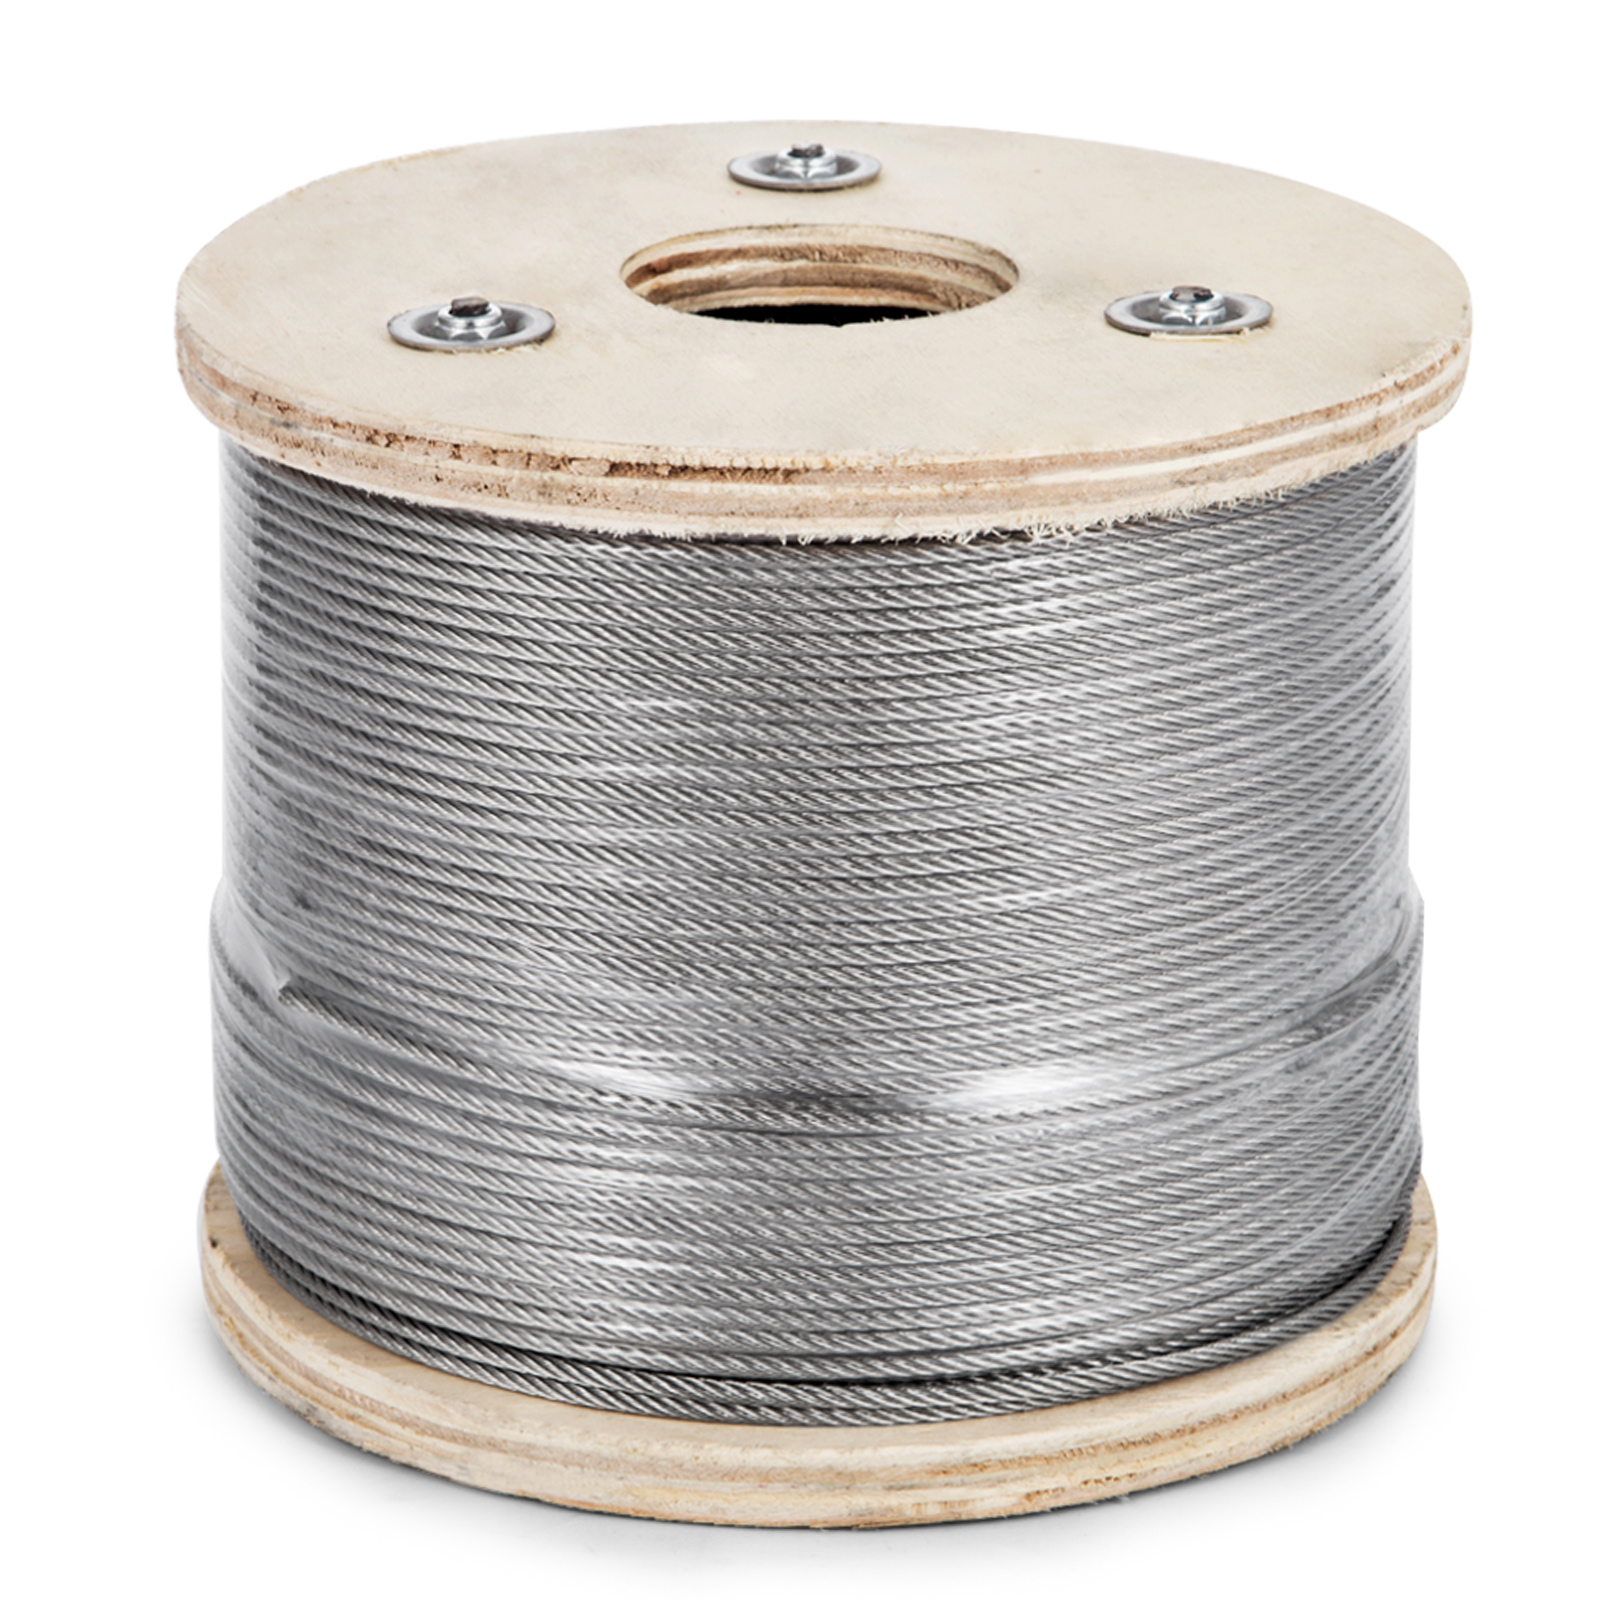 VEVOR T316 Stainless Steel Cable Wire Rope,1x19: 100,200,300,500,700 1x19 Stainless Steel Wire Rope